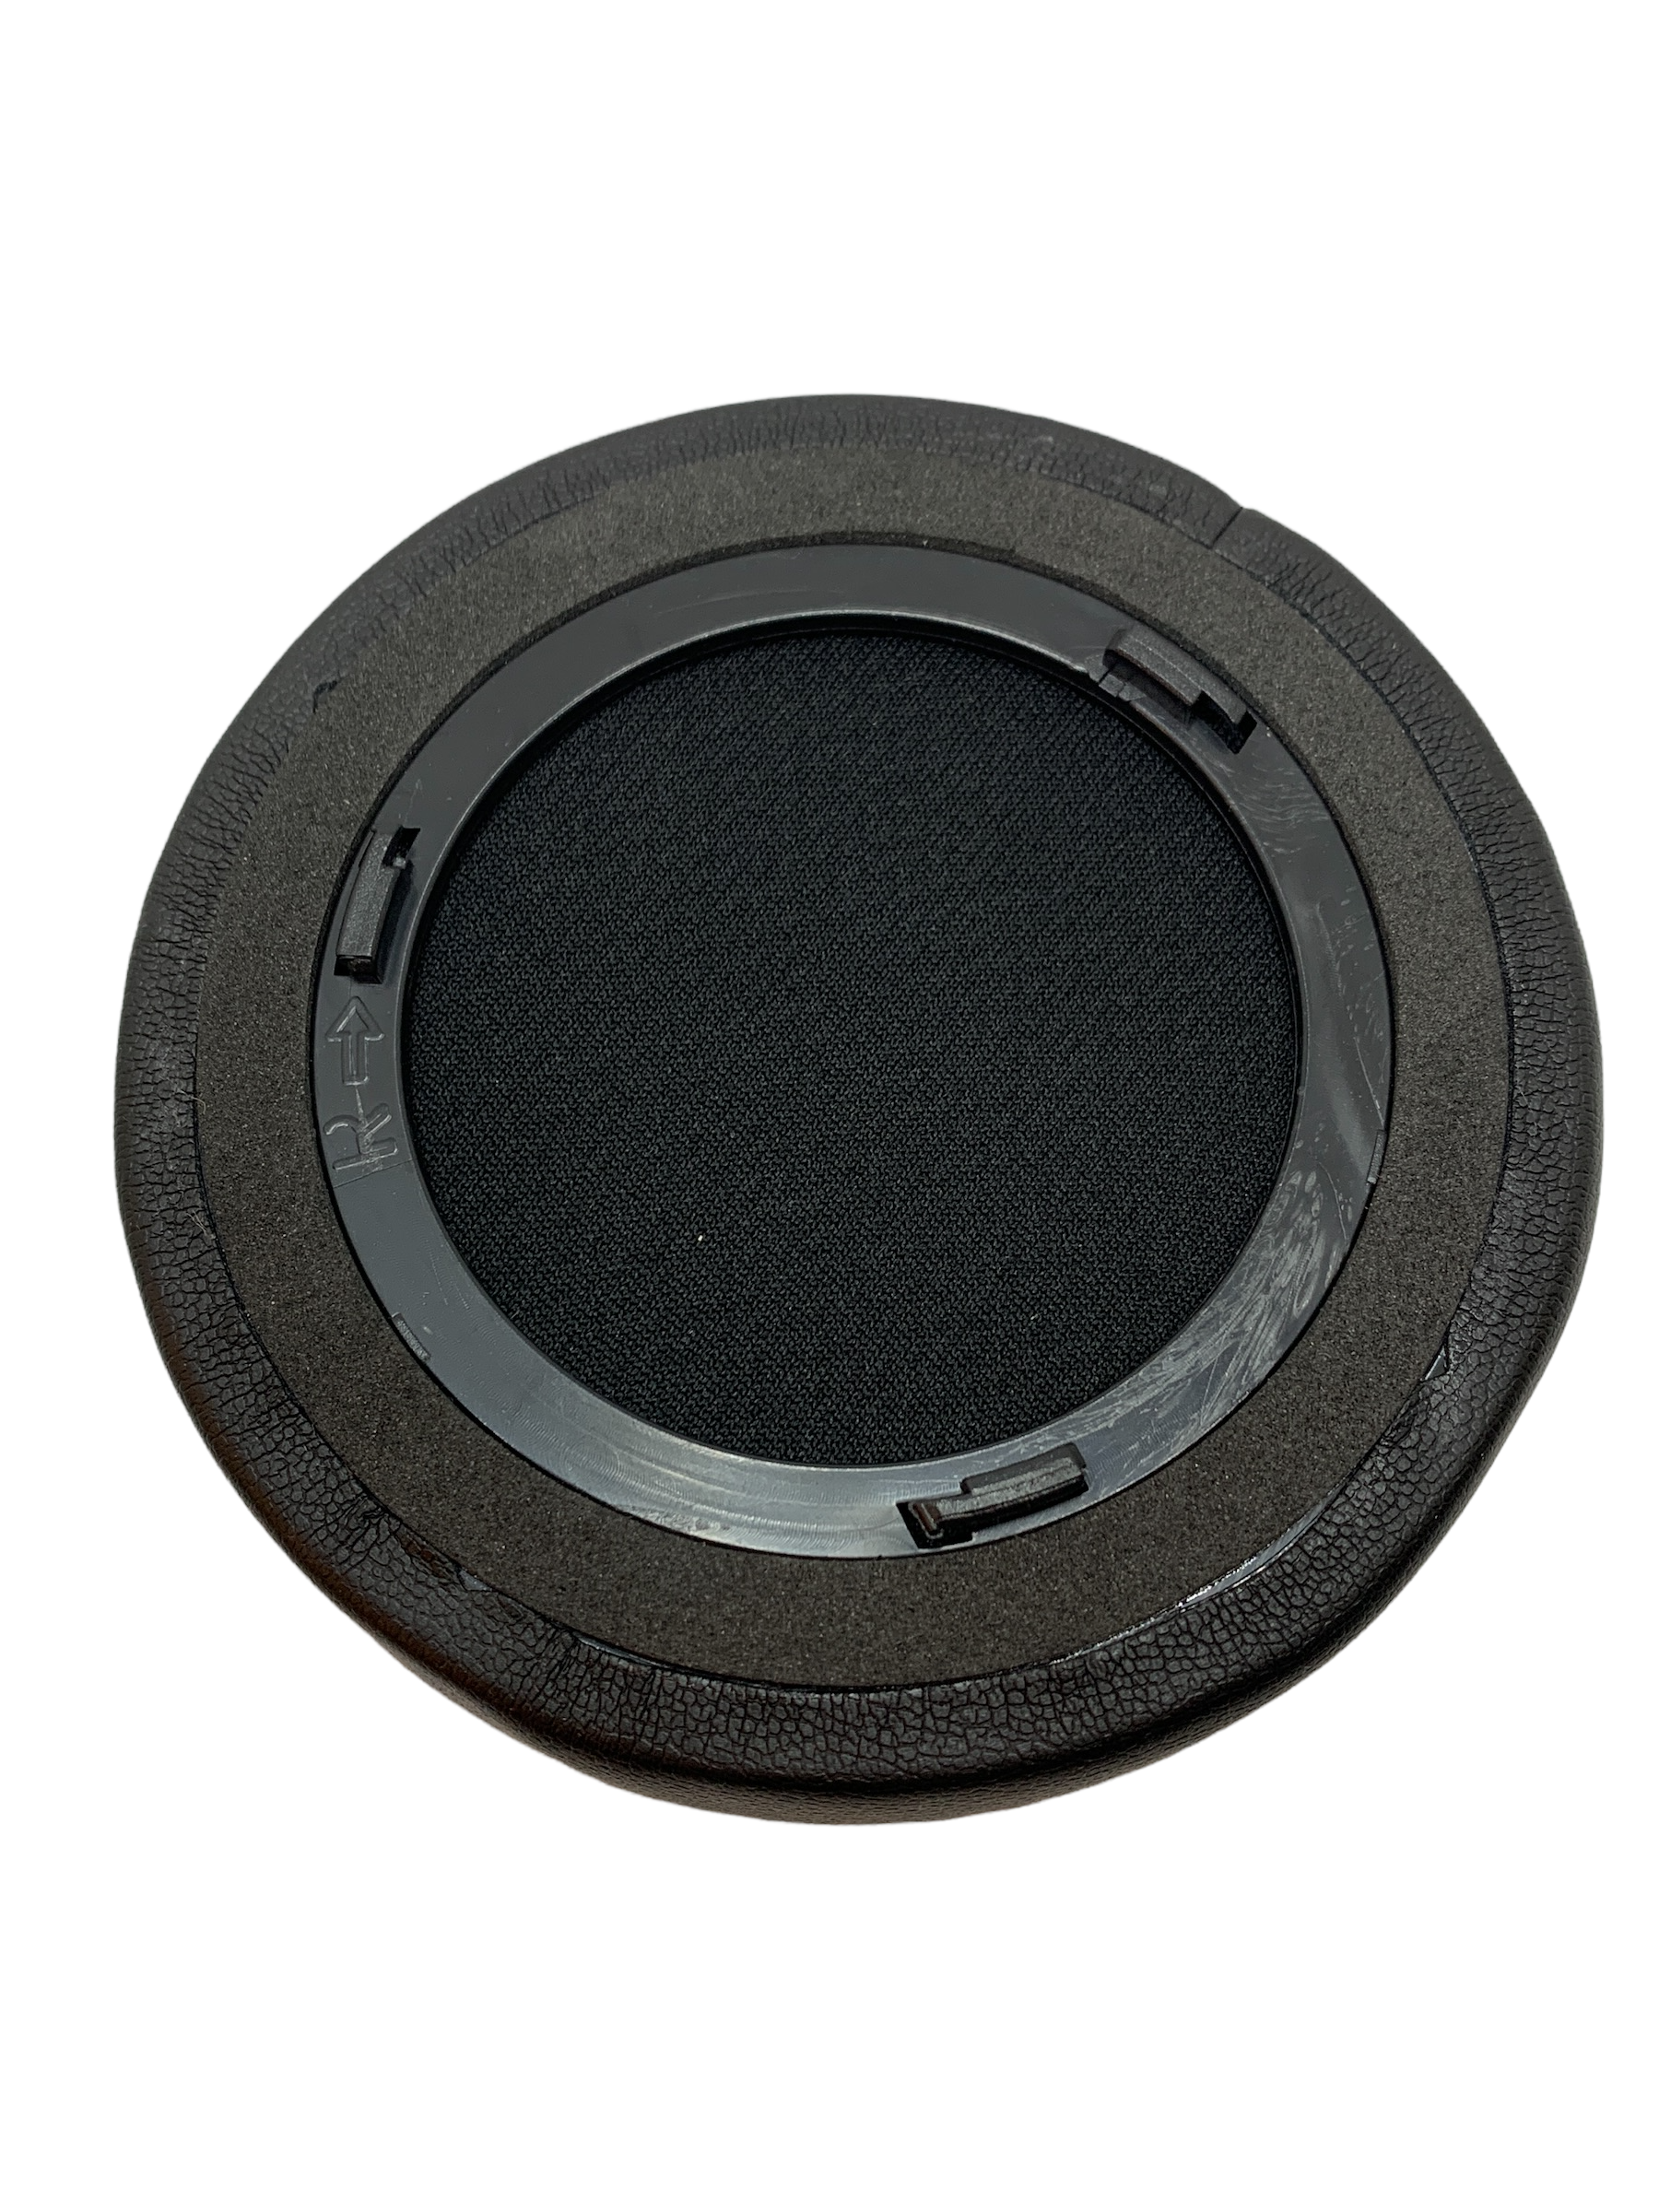 CentralSound Premium Upgraded Ear Pad Cushions for Corsair Virtuous RGB Wireless SE Gaming Headsets - CentralSound